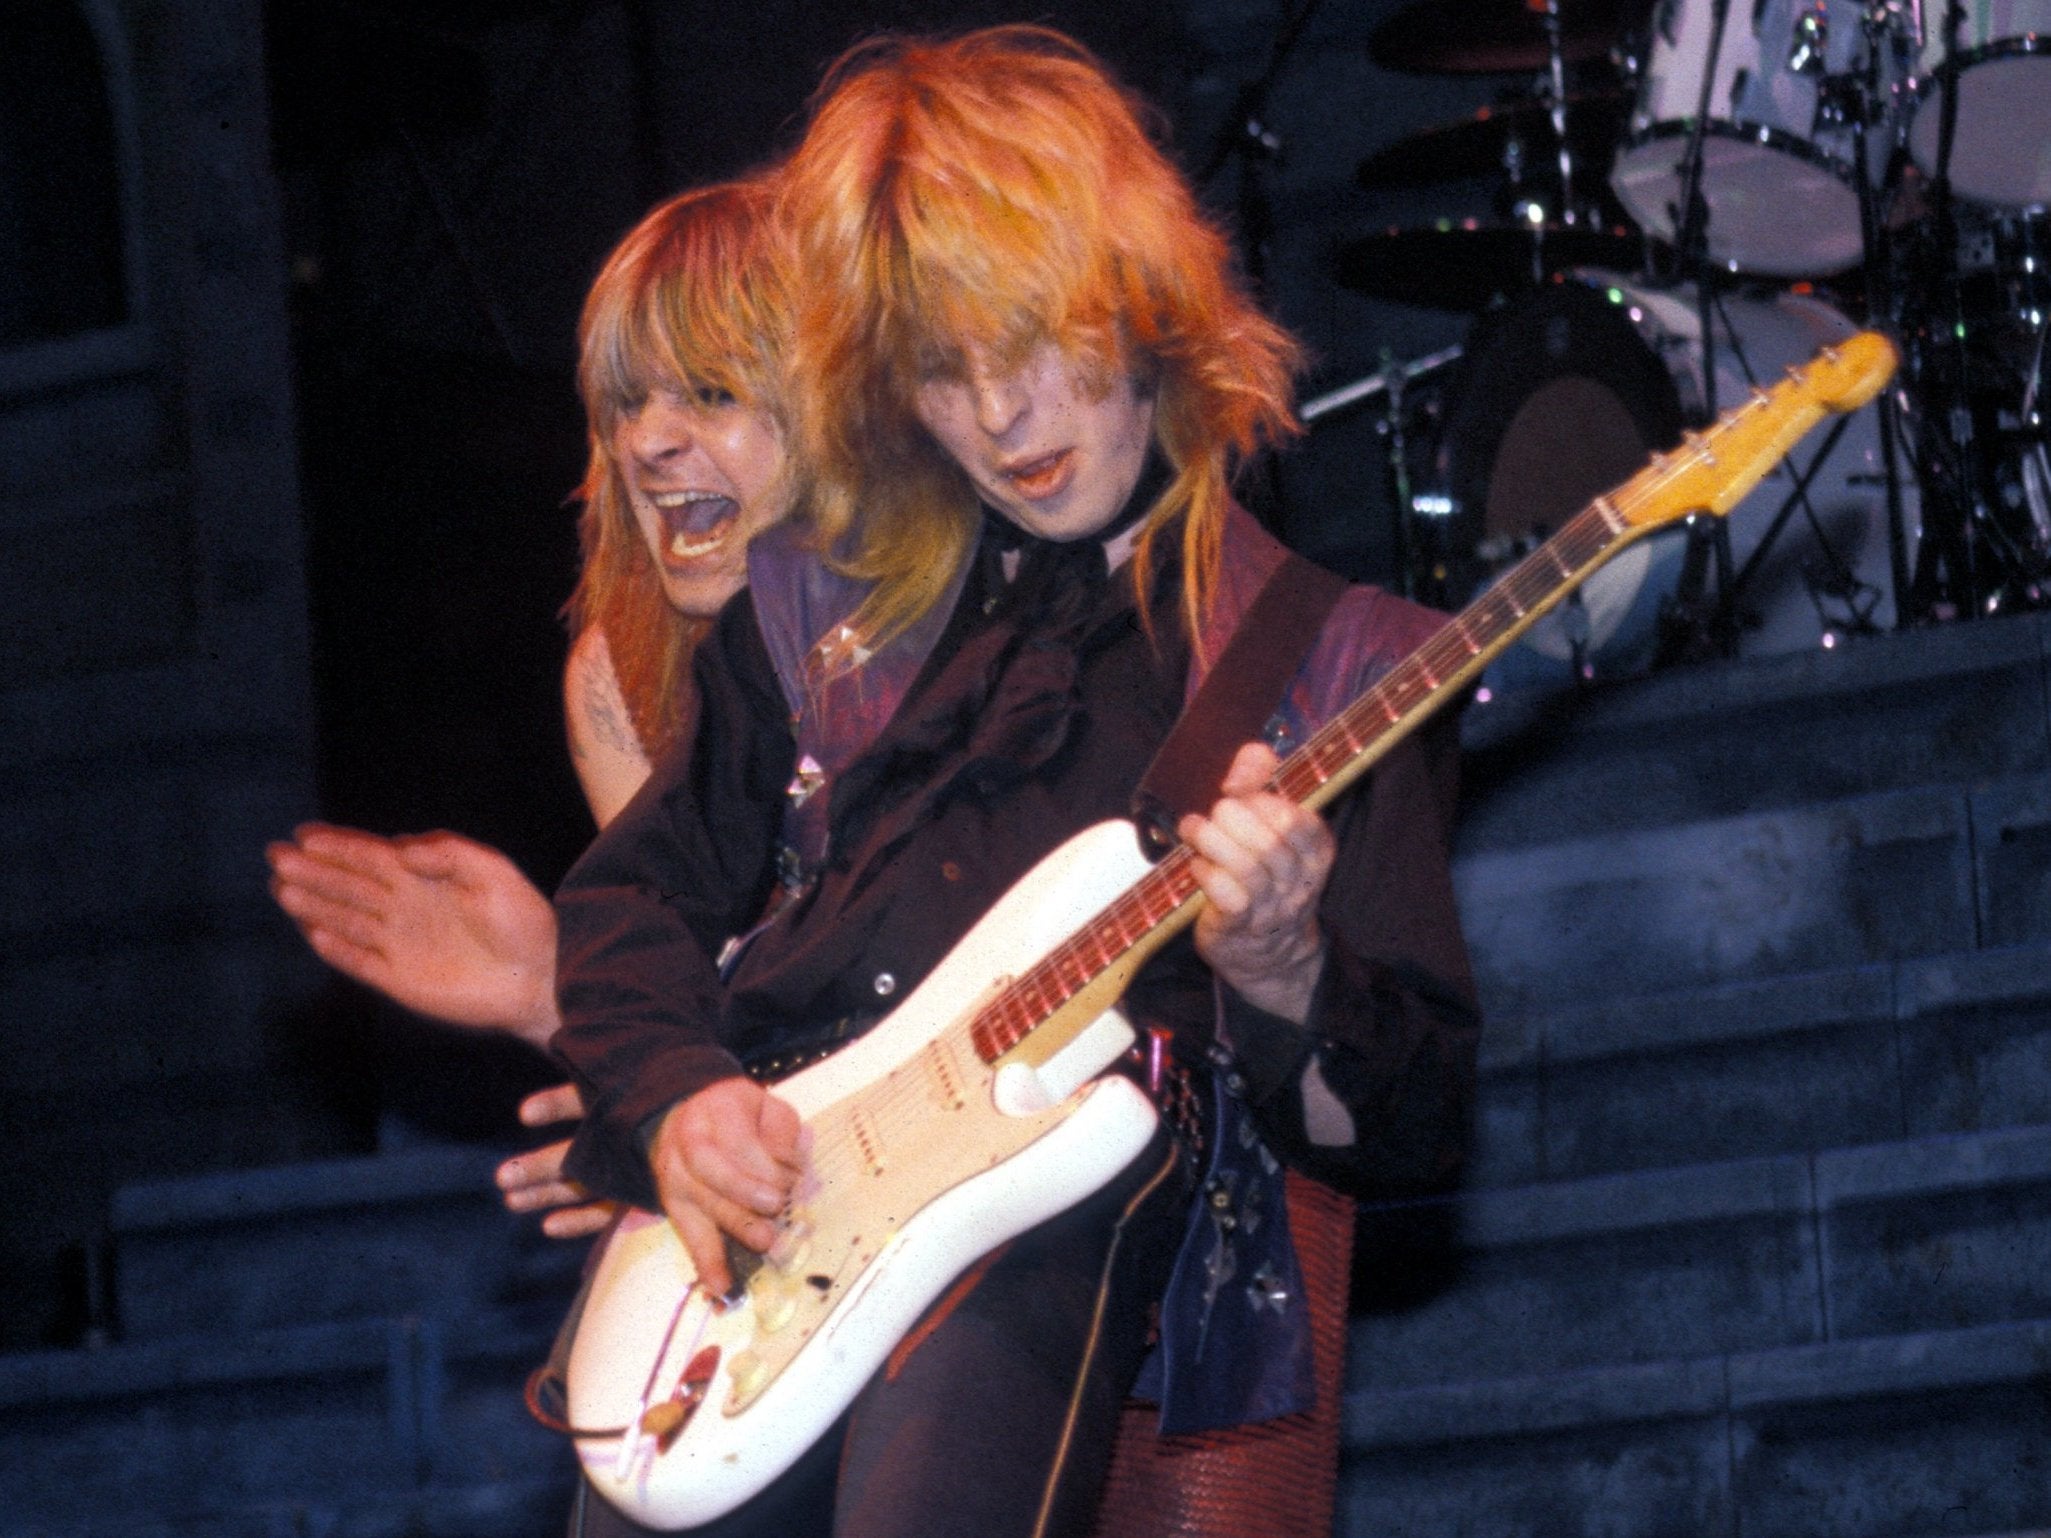 Torme (right) with Ozzy Osbourne onstage at Madison Square Garden, New York, in 1982